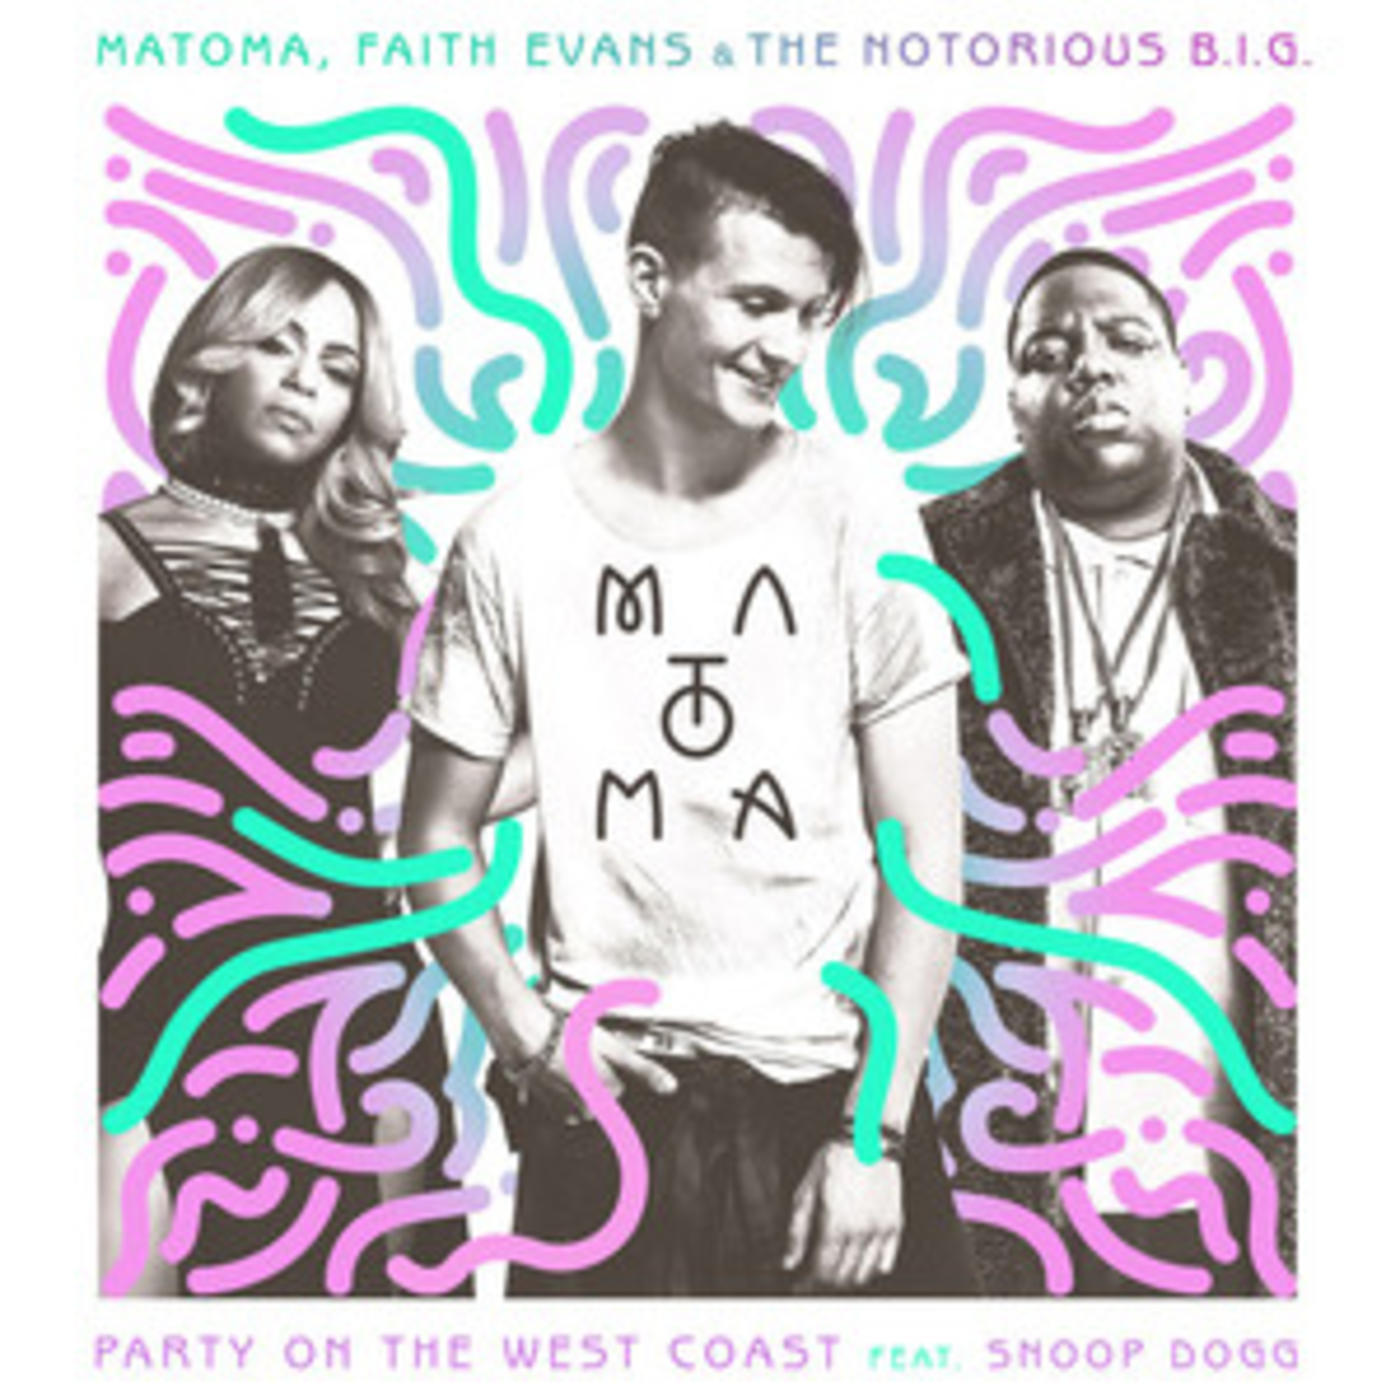 The King & I + Matoma, Faith Evans, Snoop Dogg - Party On The West Coast, plus Biggie's best tracks